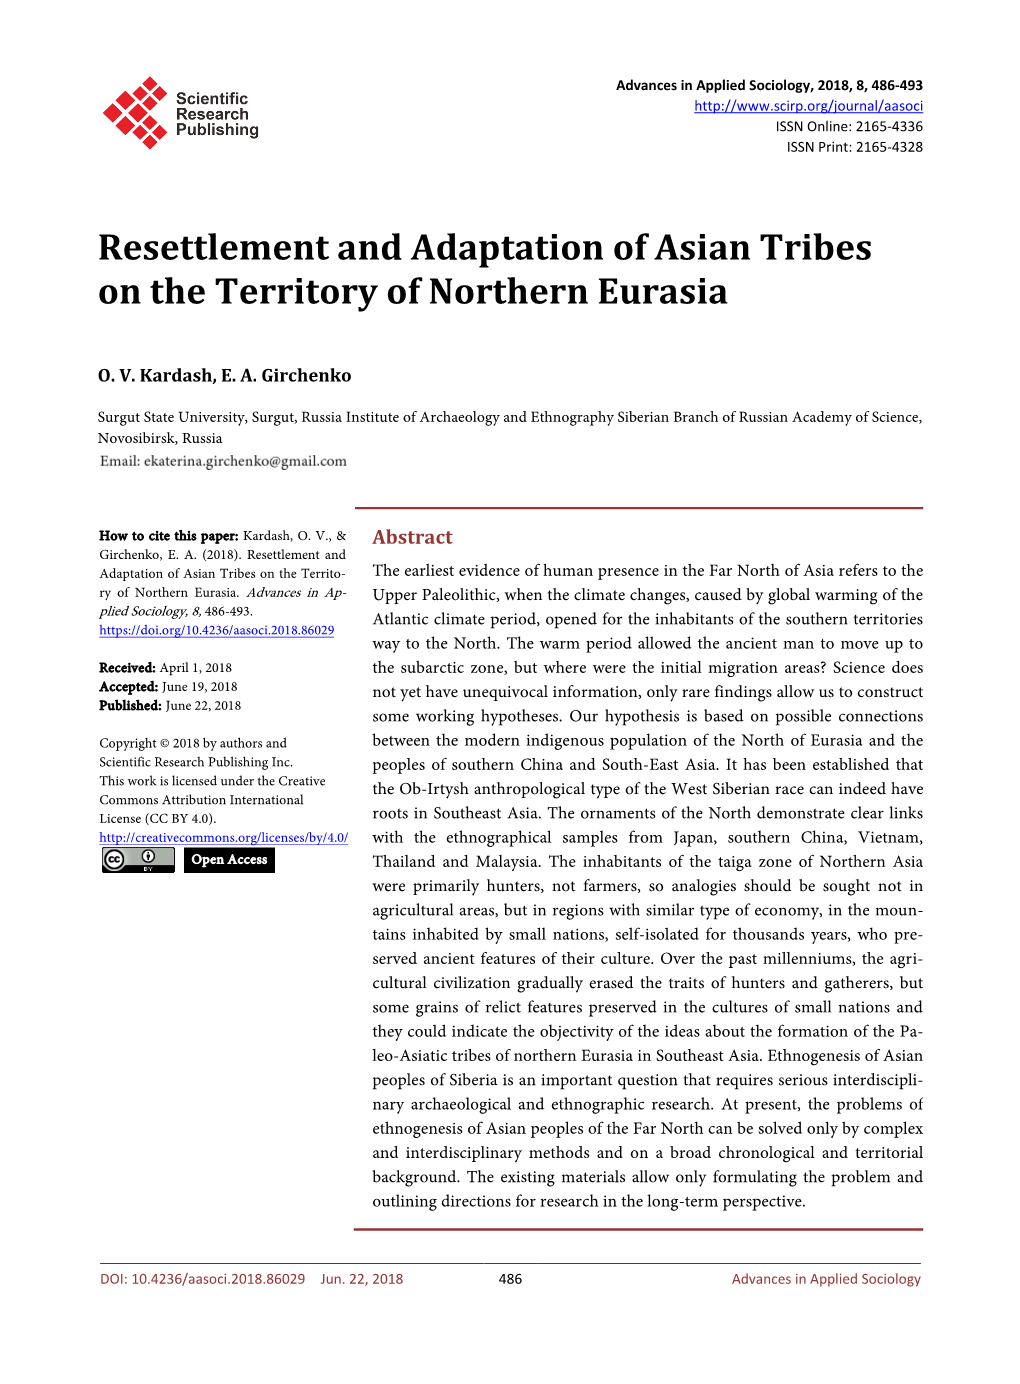 Resettlement and Adaptation of Asian Tribes on the Territory of Northern Eurasia